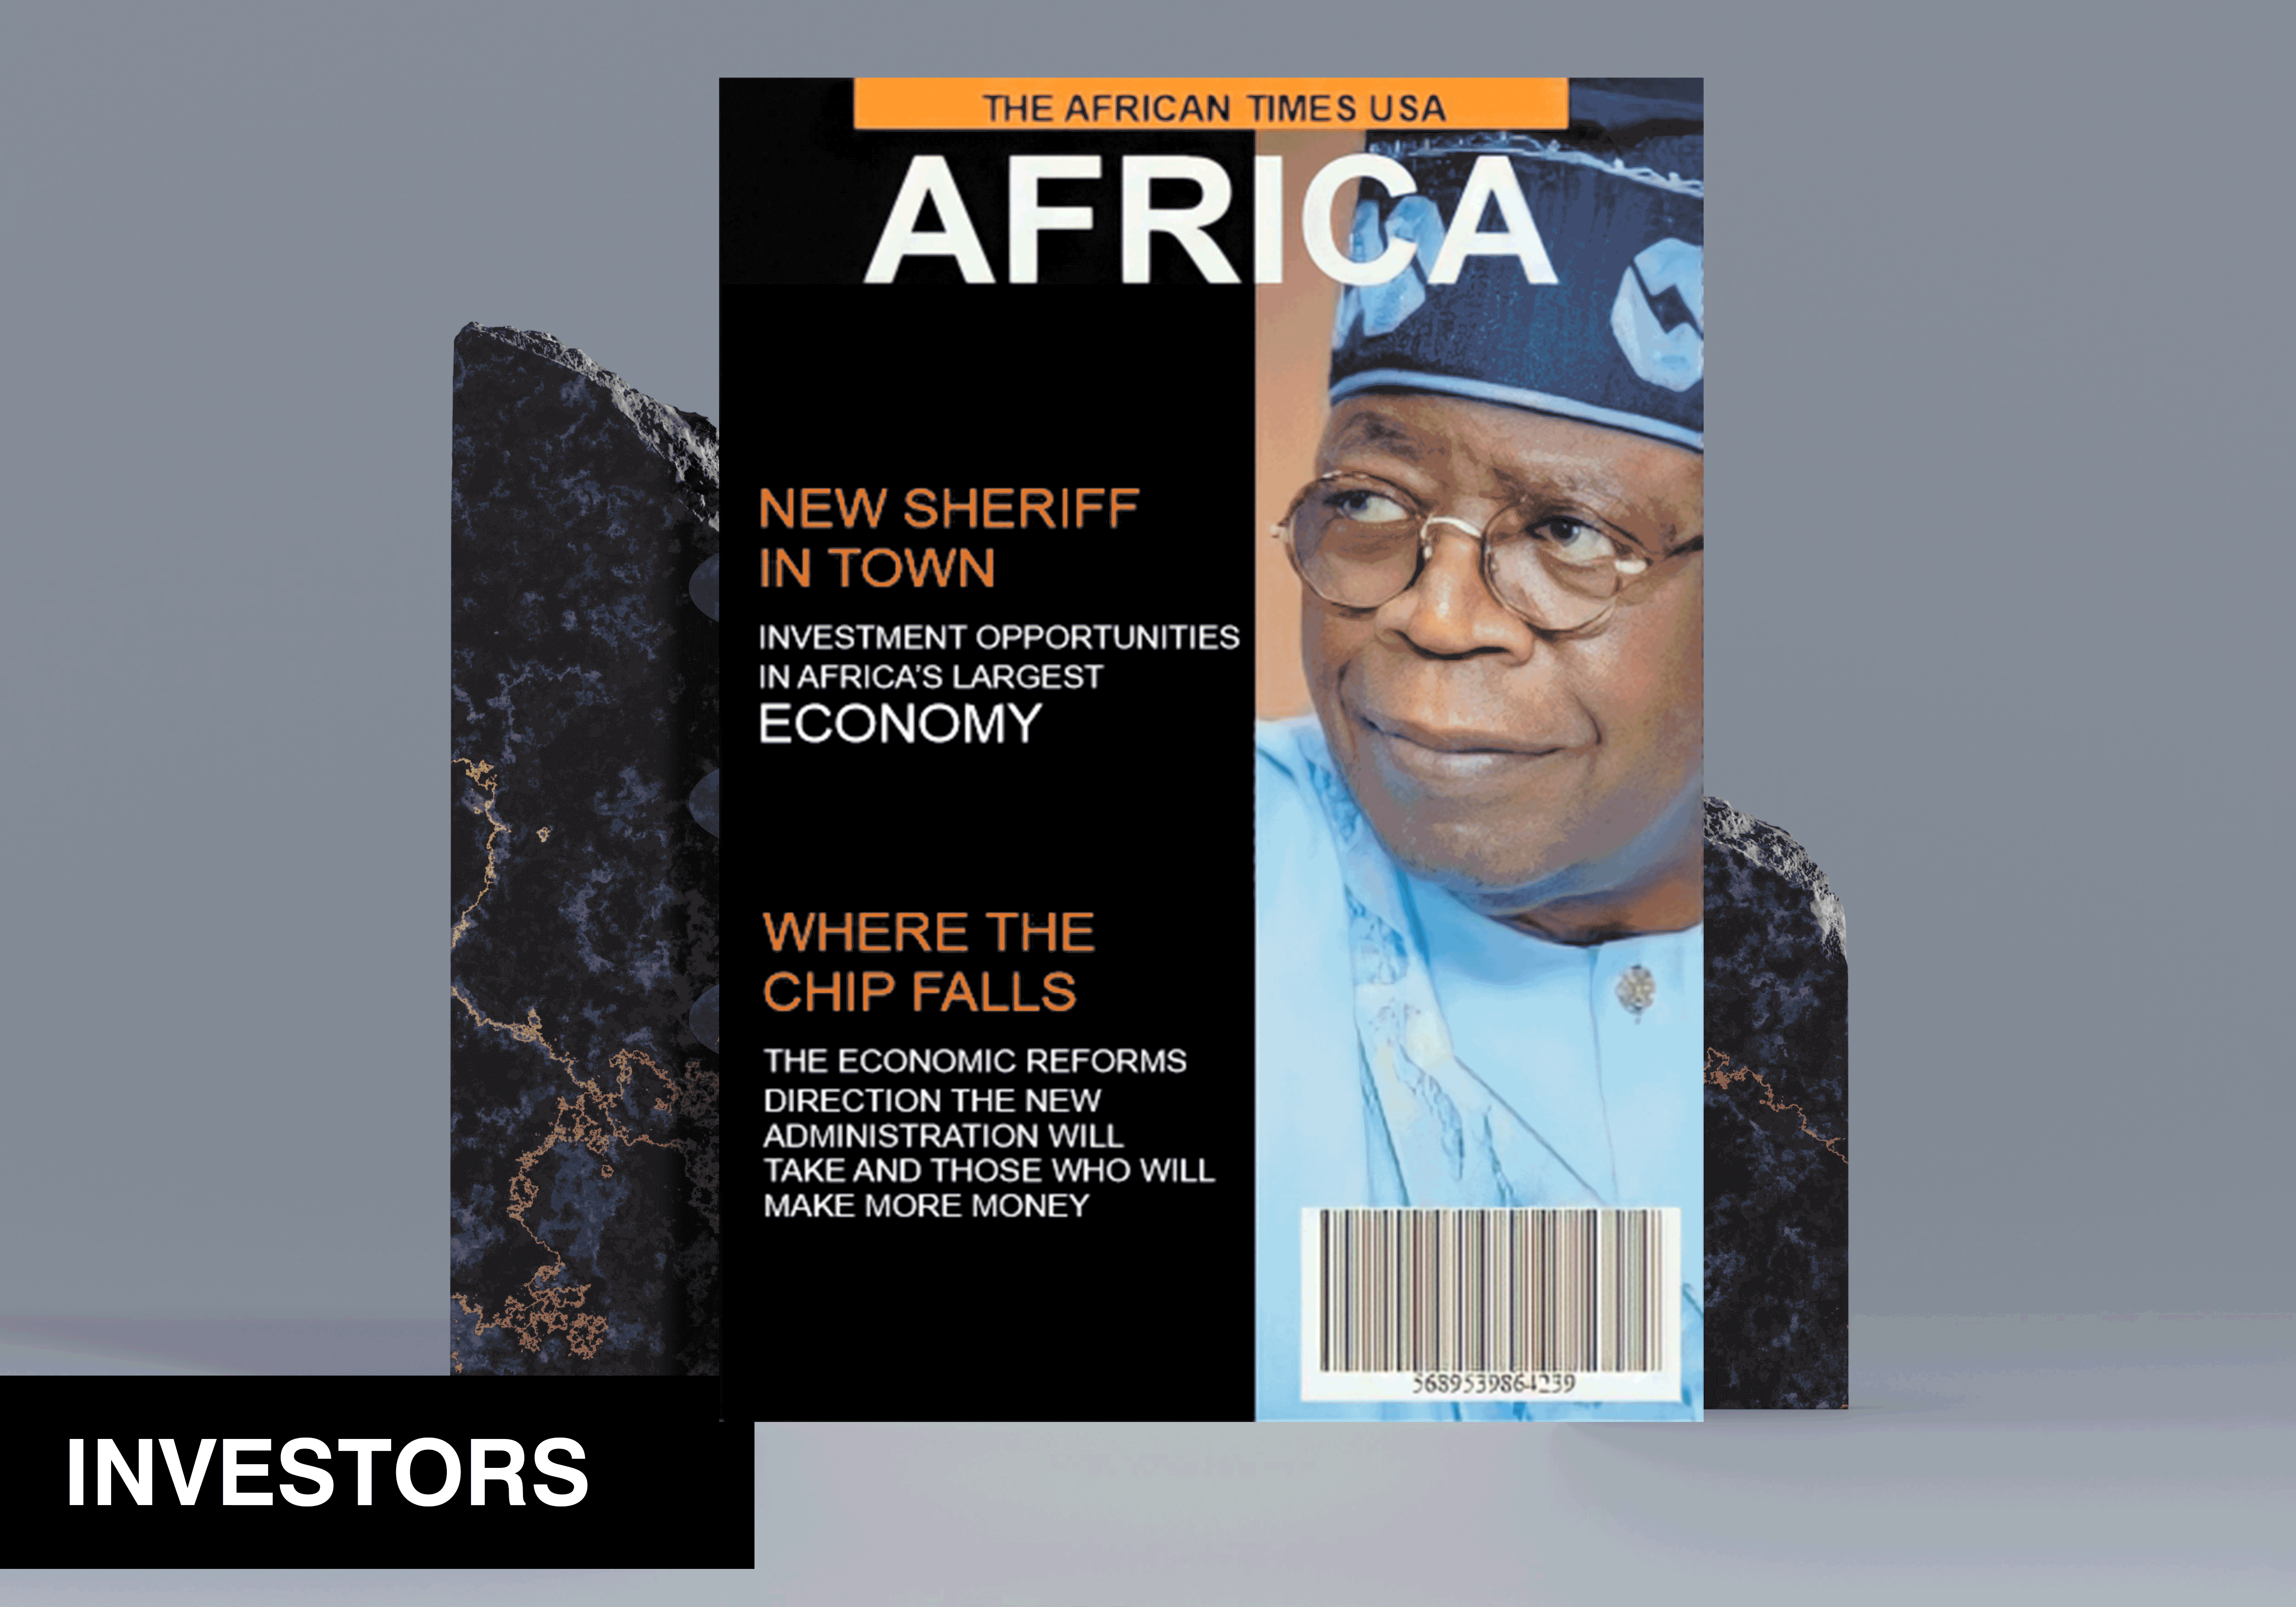 THE-AFRICAN-TIMES-USA-TINUBU-COVER2.png